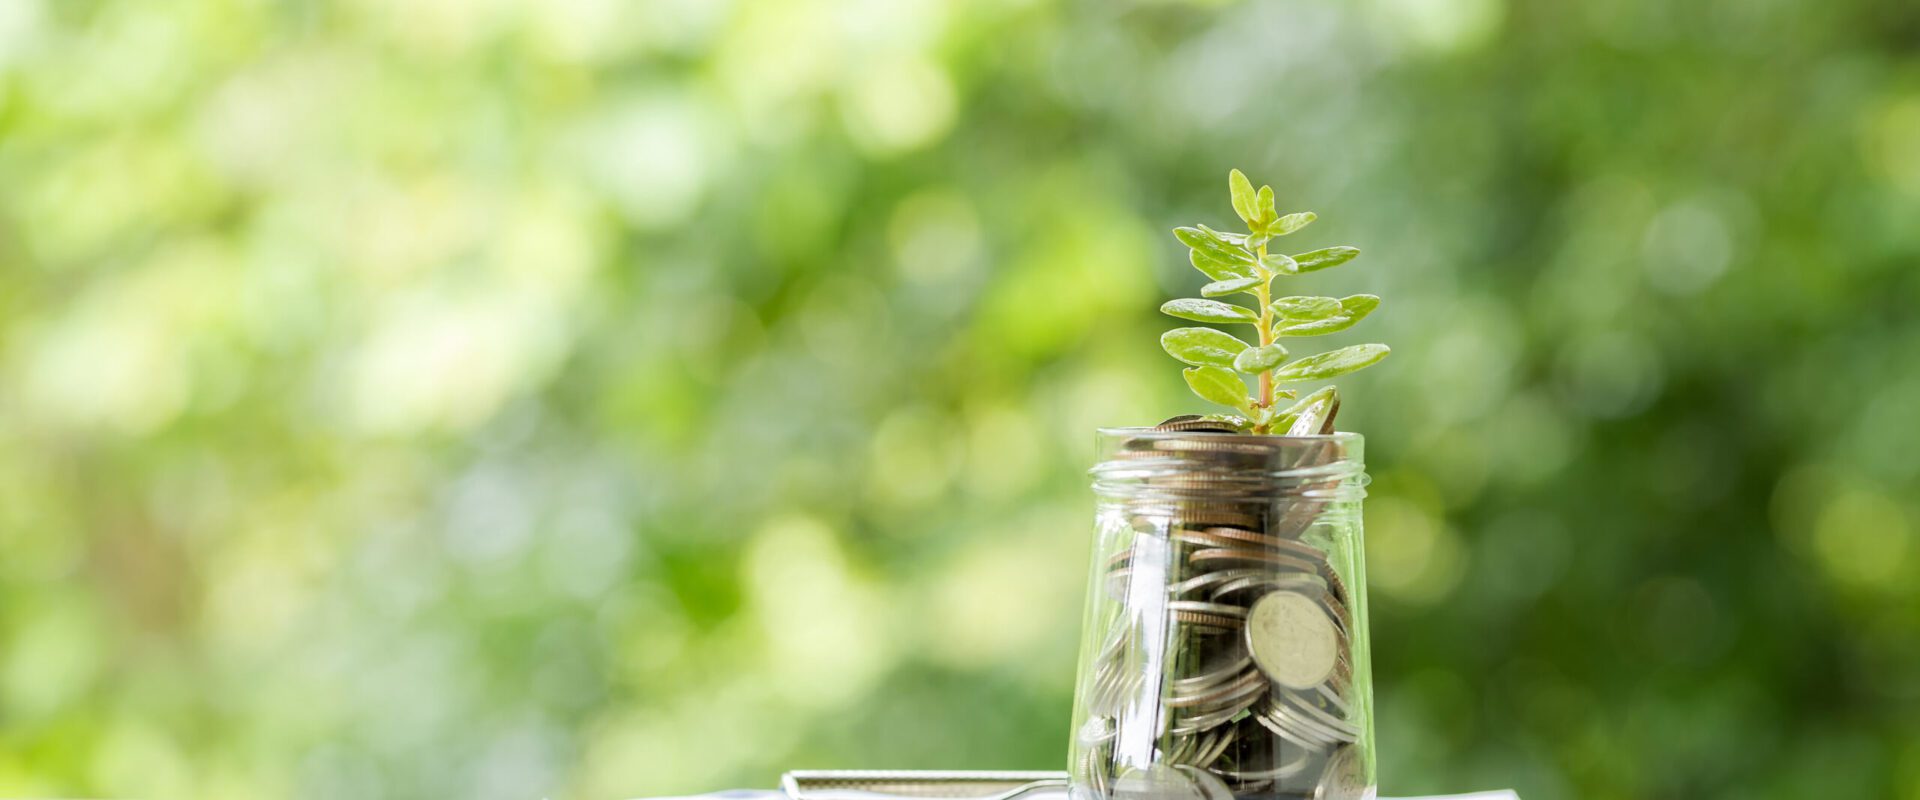 Plant growing from coins in the glass jar on blurred green nature